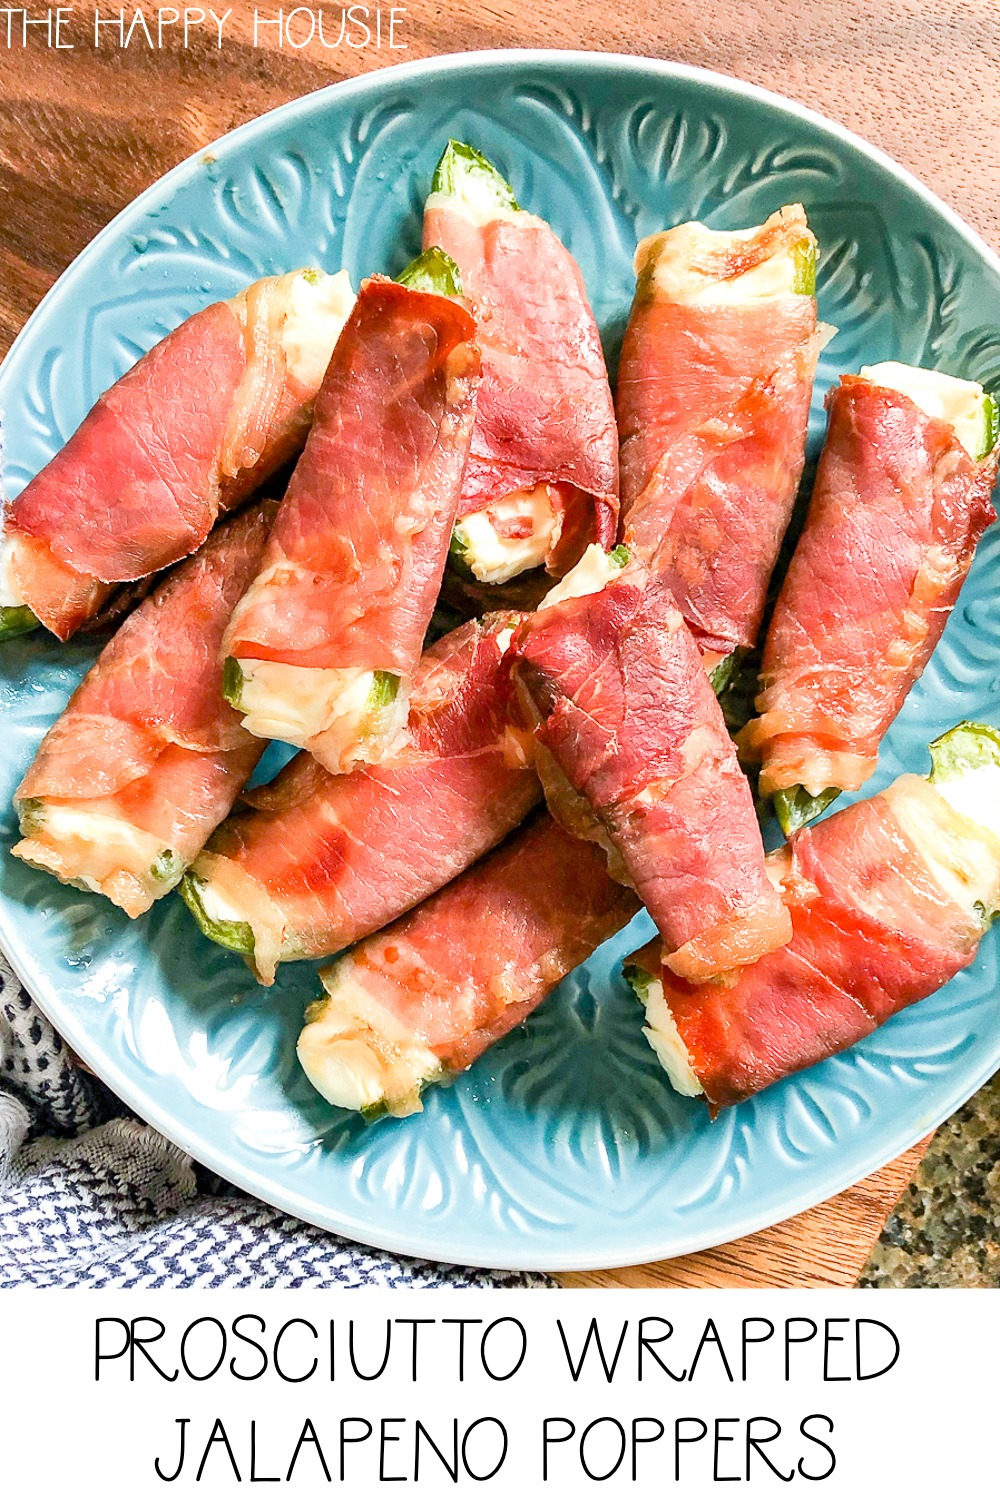 The prosciutto wrapped jalapeno poppers on a blue plate.